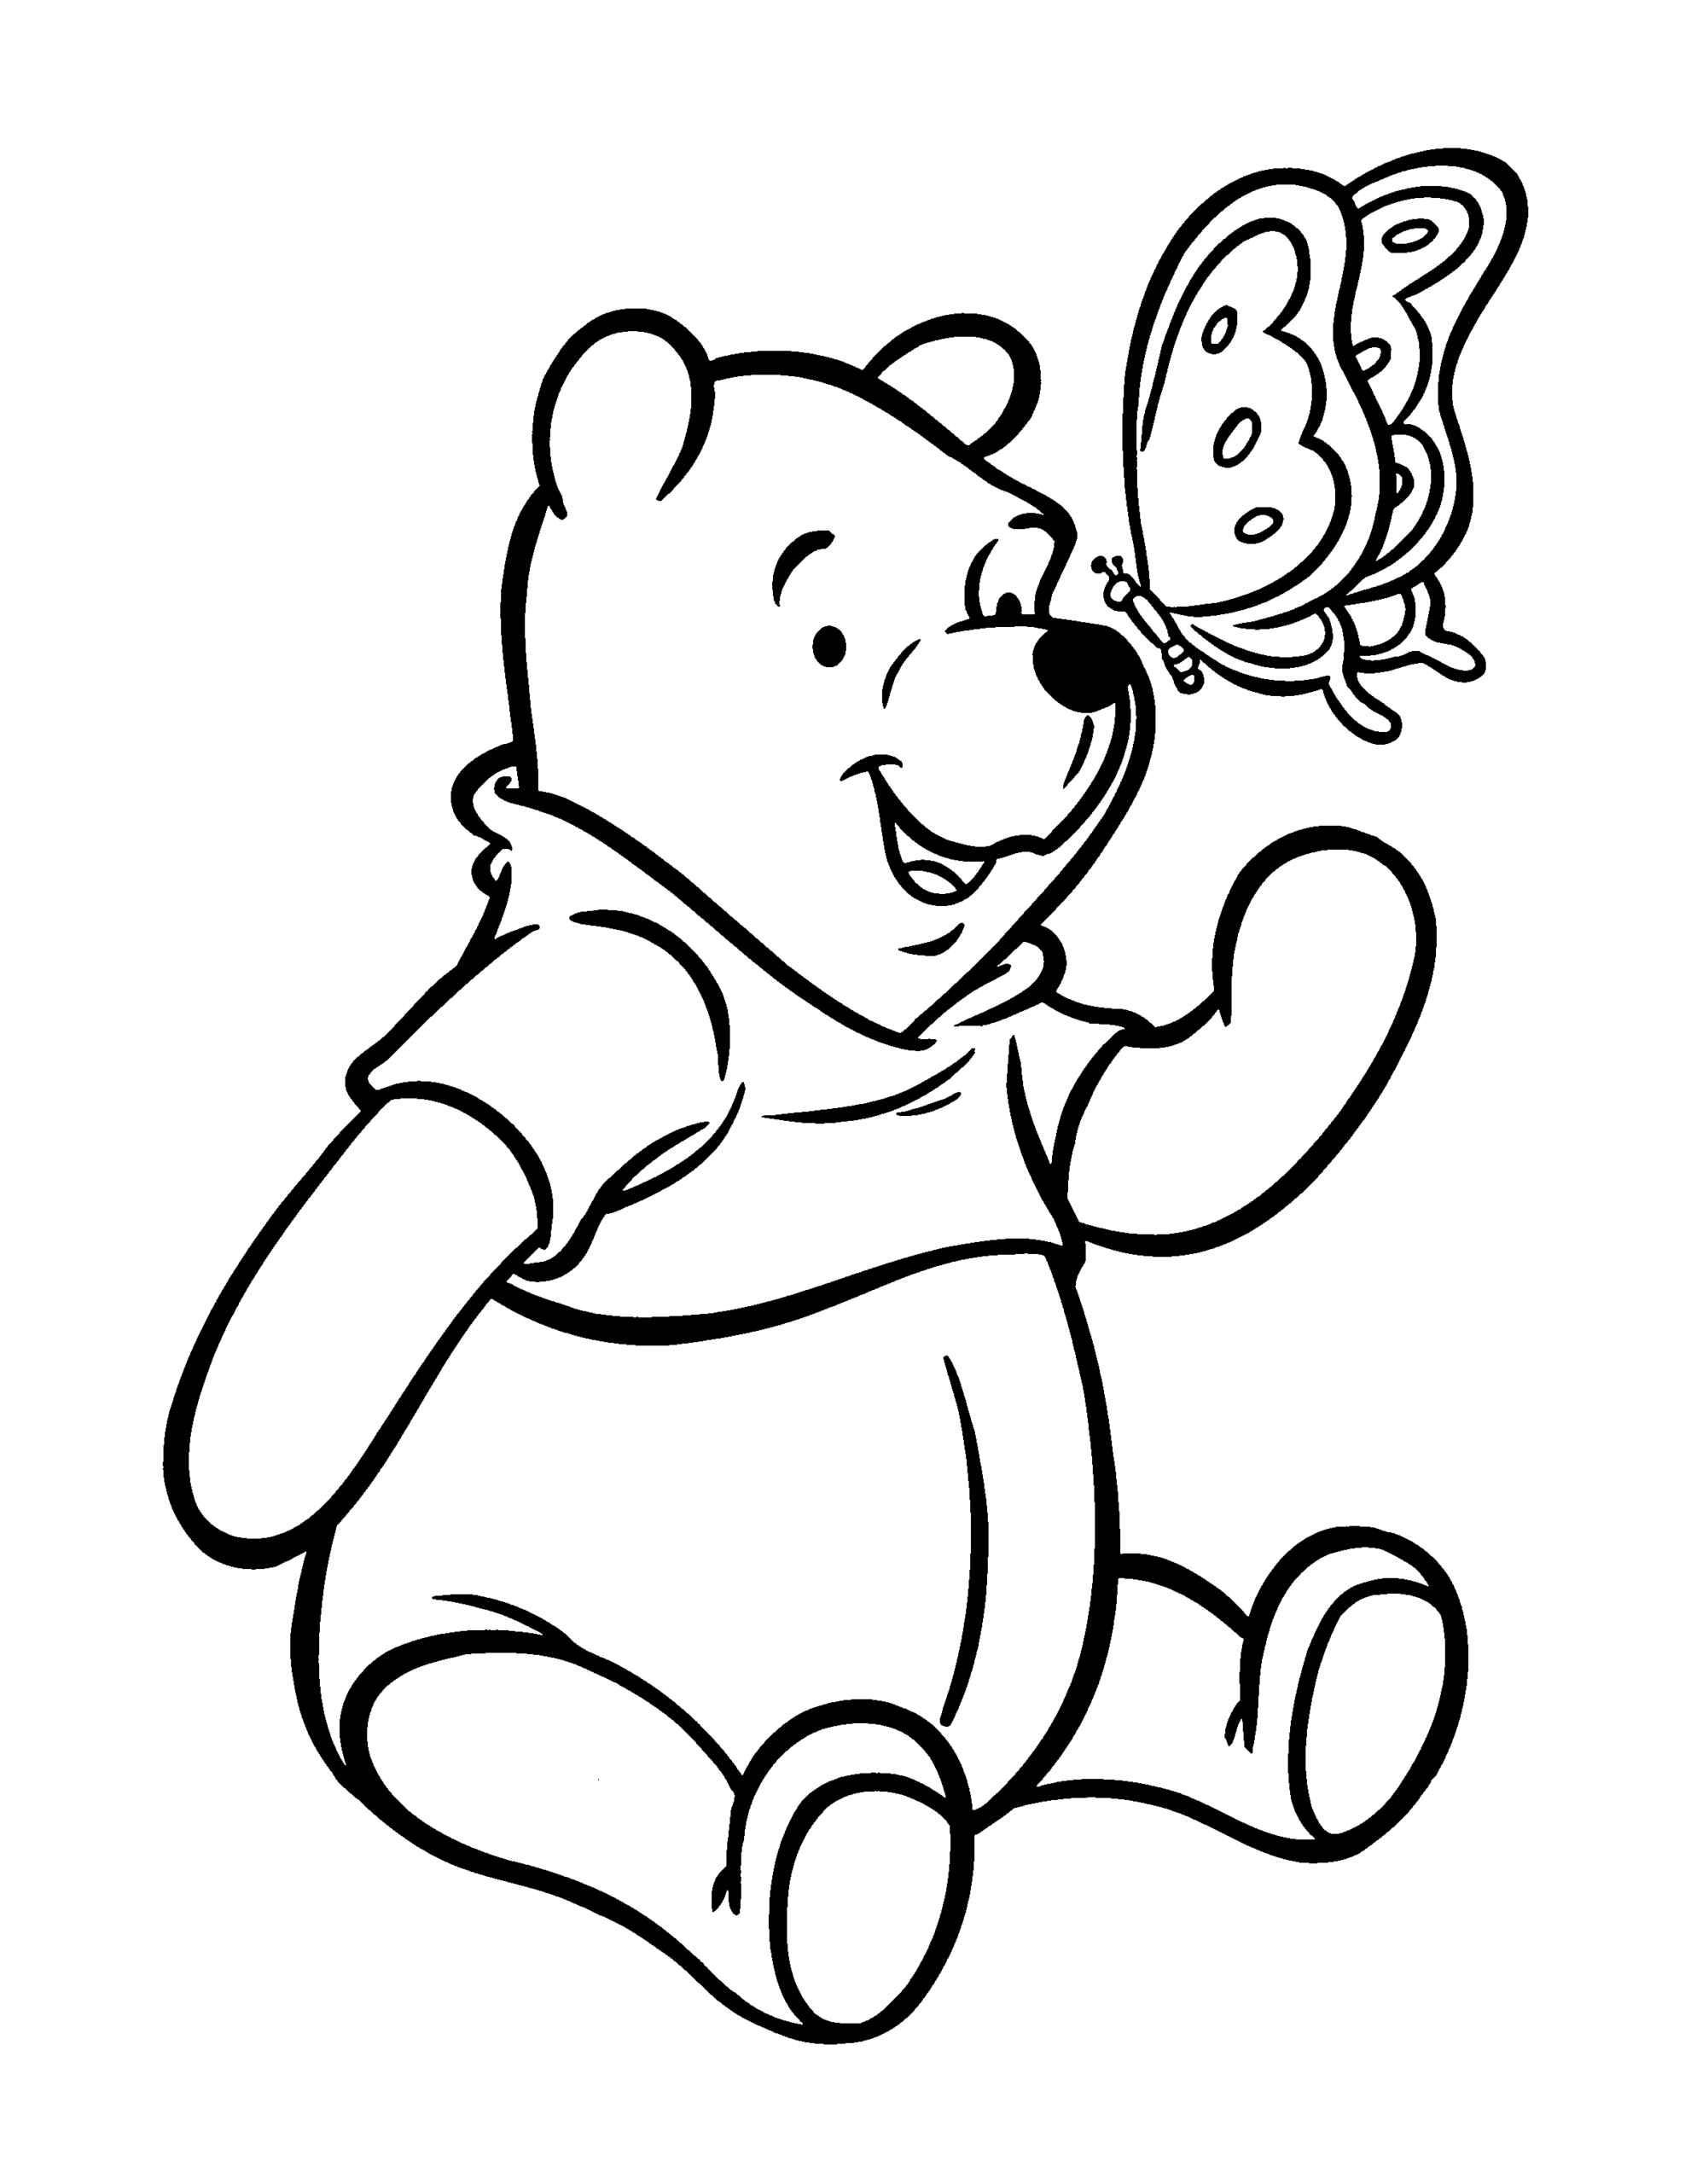 Winnie the Pooh Coloring Pages Cartoons_winnie the pooh for kids Printable 2020 6930 Coloring4free